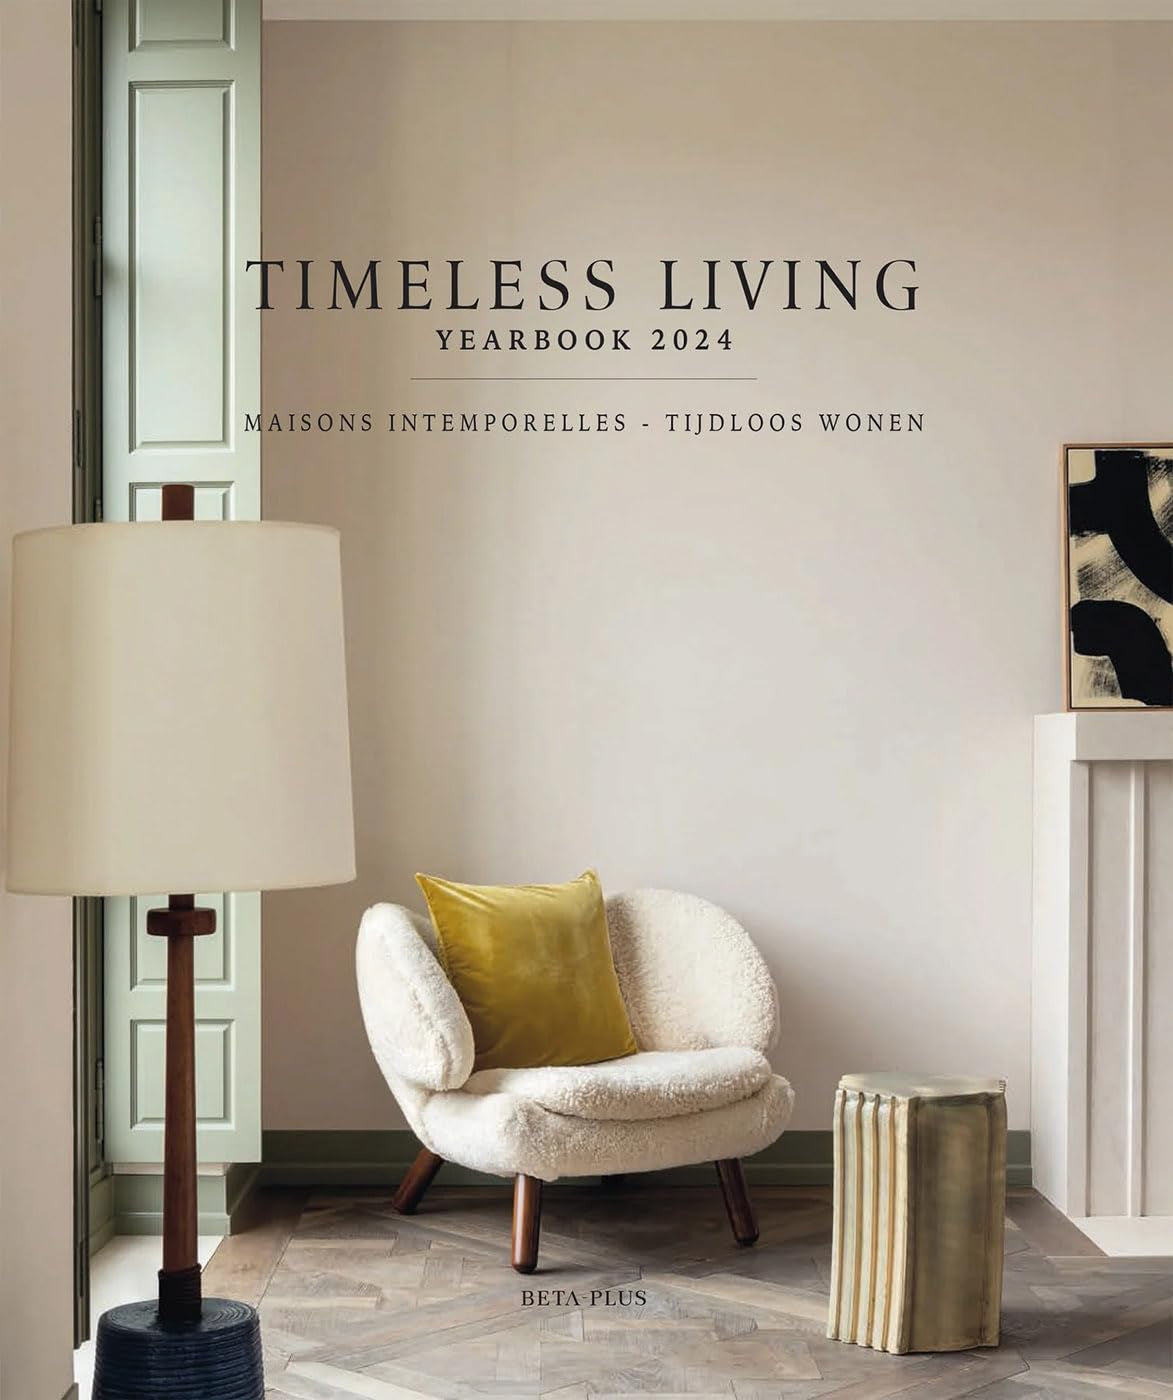 Cover of the National Book Network's "Timeless Living Yearbook 2024" featuring a minimalistic room with a stylish chair, a floor lamp, artwork, and accent items in a serene Arizona color palette.